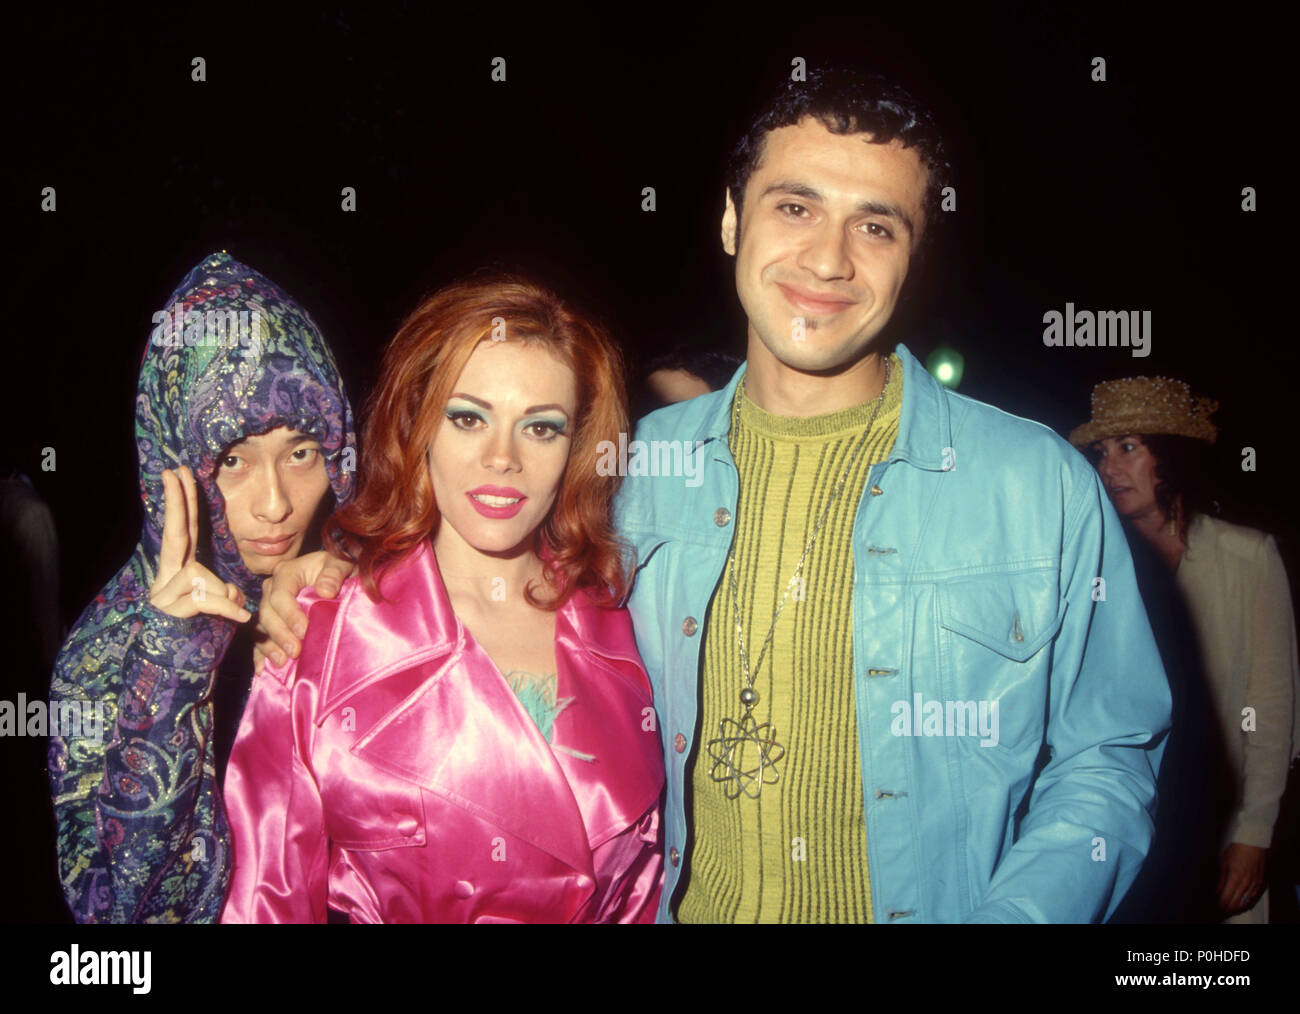 UNIVERSAL CITY, CA - SEPTEMBER 05: Singers/musicians Towa Tei, Lady Miss Kier and Dmitry Brill of Deee-Lite attend the Eighth Annual MTV Video Music Awards on September 5, 1991 at Universal Amphitheatre in Universal City, California. Photo by Barry King/Alamy Stock Photo Stock Photo